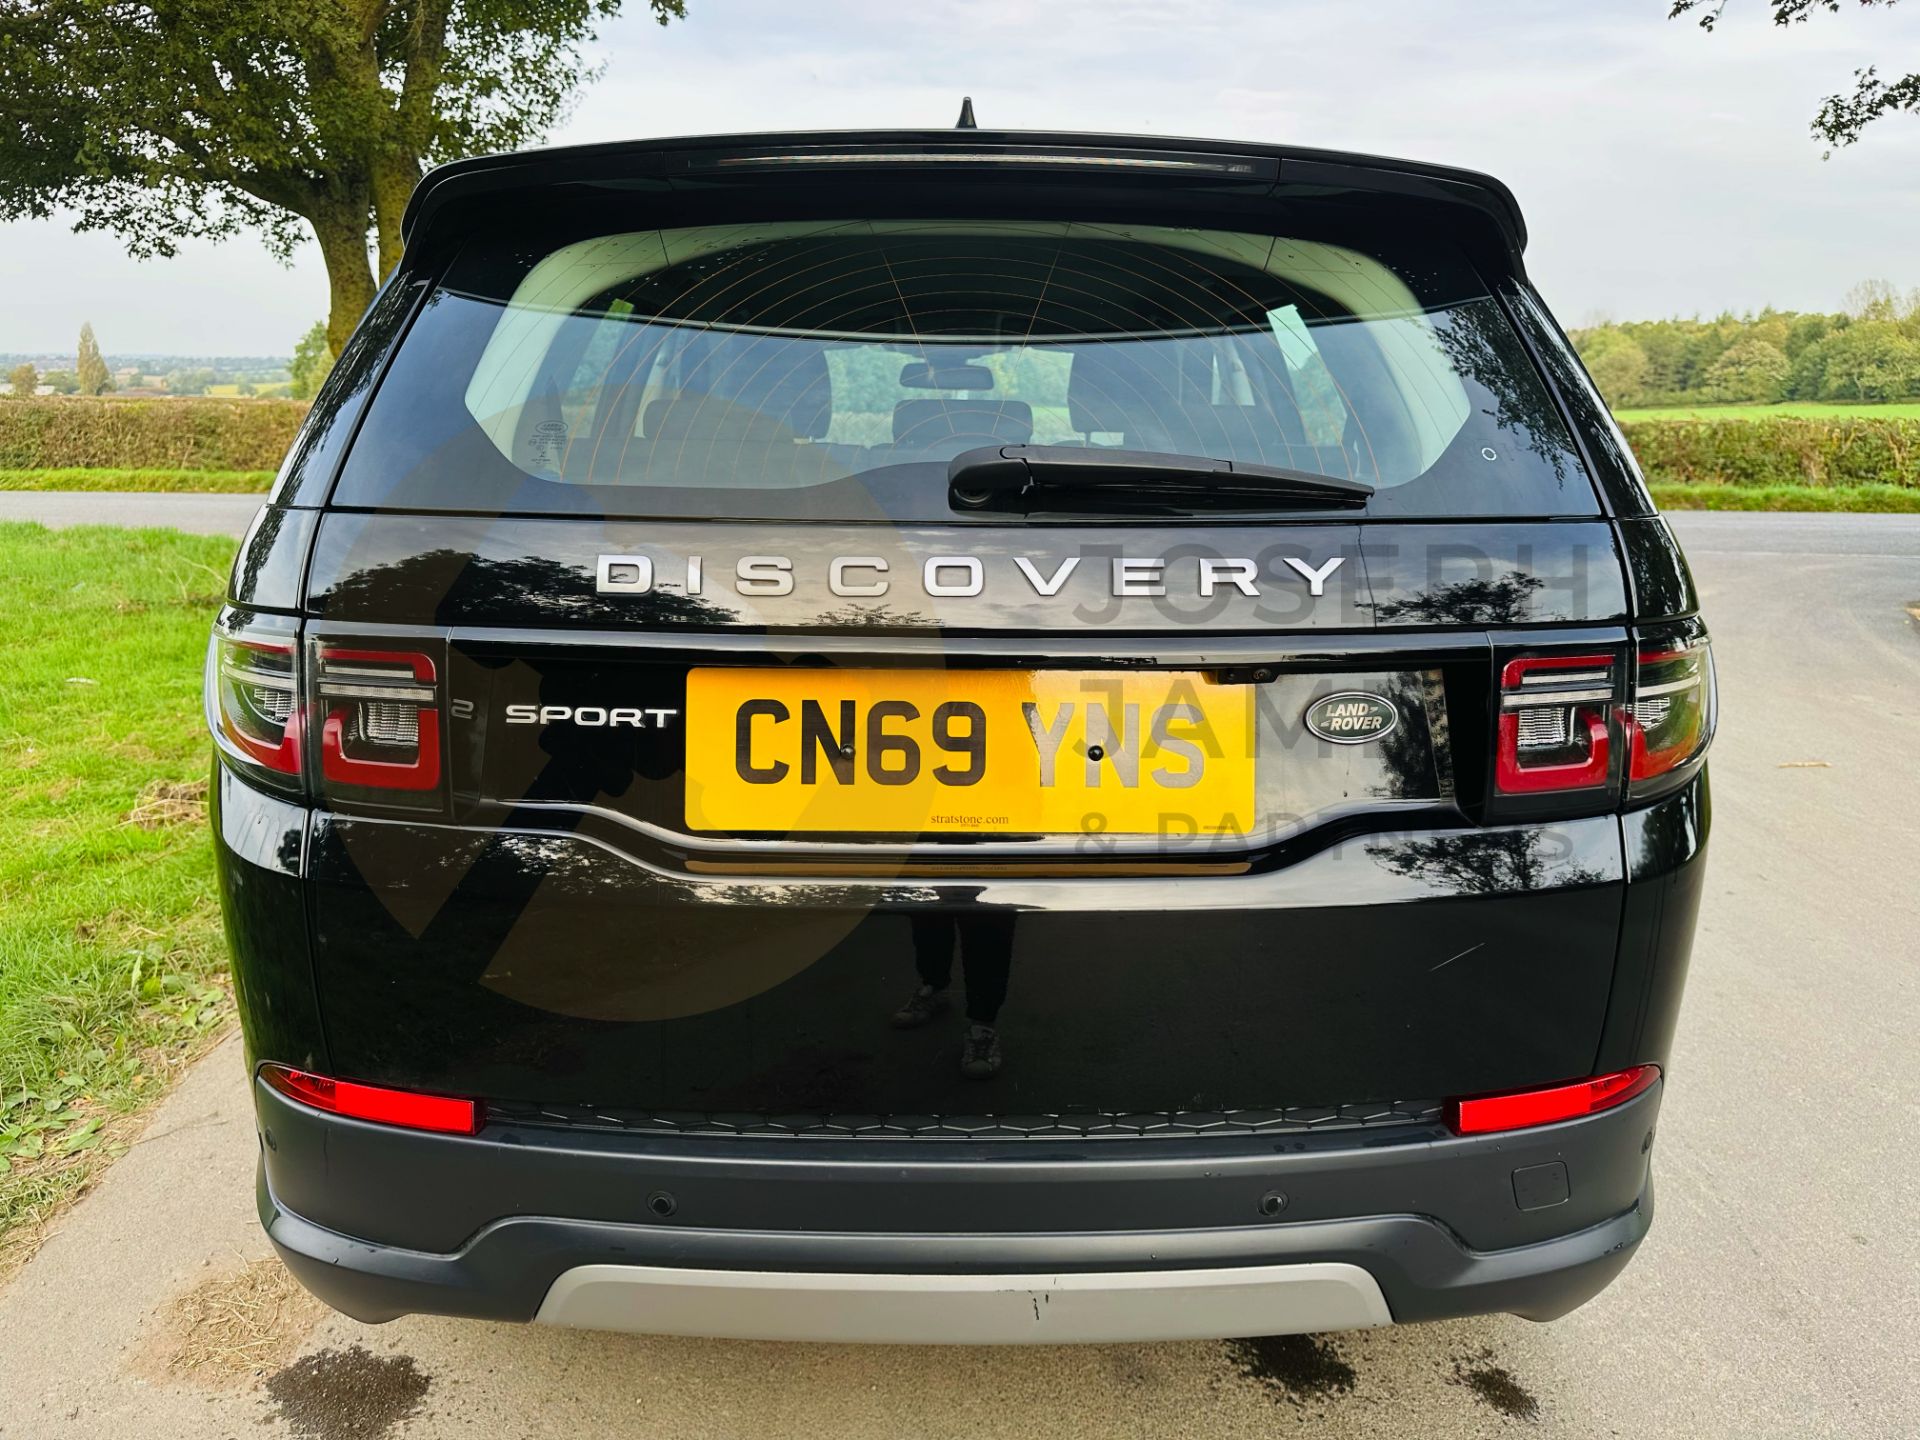 ON SALE LAND ROVER DISCOVERY SPORT (69 REG) - *2020 FACELIFT MODEL* - 1 OWNER FROM NEW - Image 13 of 39